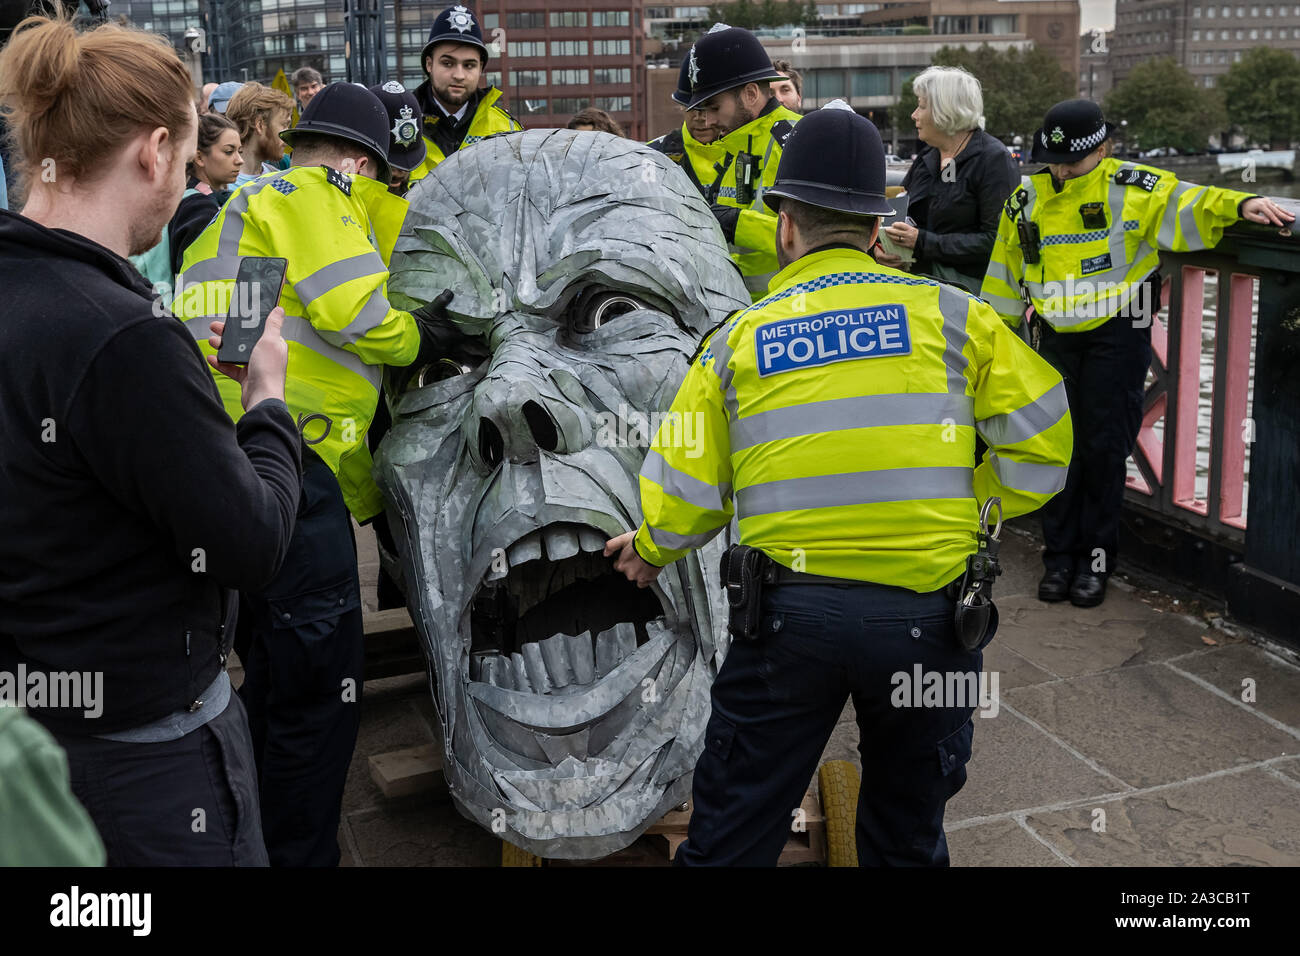 London, UK. 7th Oct, 2019. Police seize body parts of a giant metallic figure from Extinction Rebellion protesters during an occupation of Lambeth Bridge. The environmental campaigners begin a new wave of protest action this morning causing disruption in London. The Metropolitan Police confirmed 21 arrests so far this morning. Credit: Guy Corbishley/Alamy Live News Stock Photo